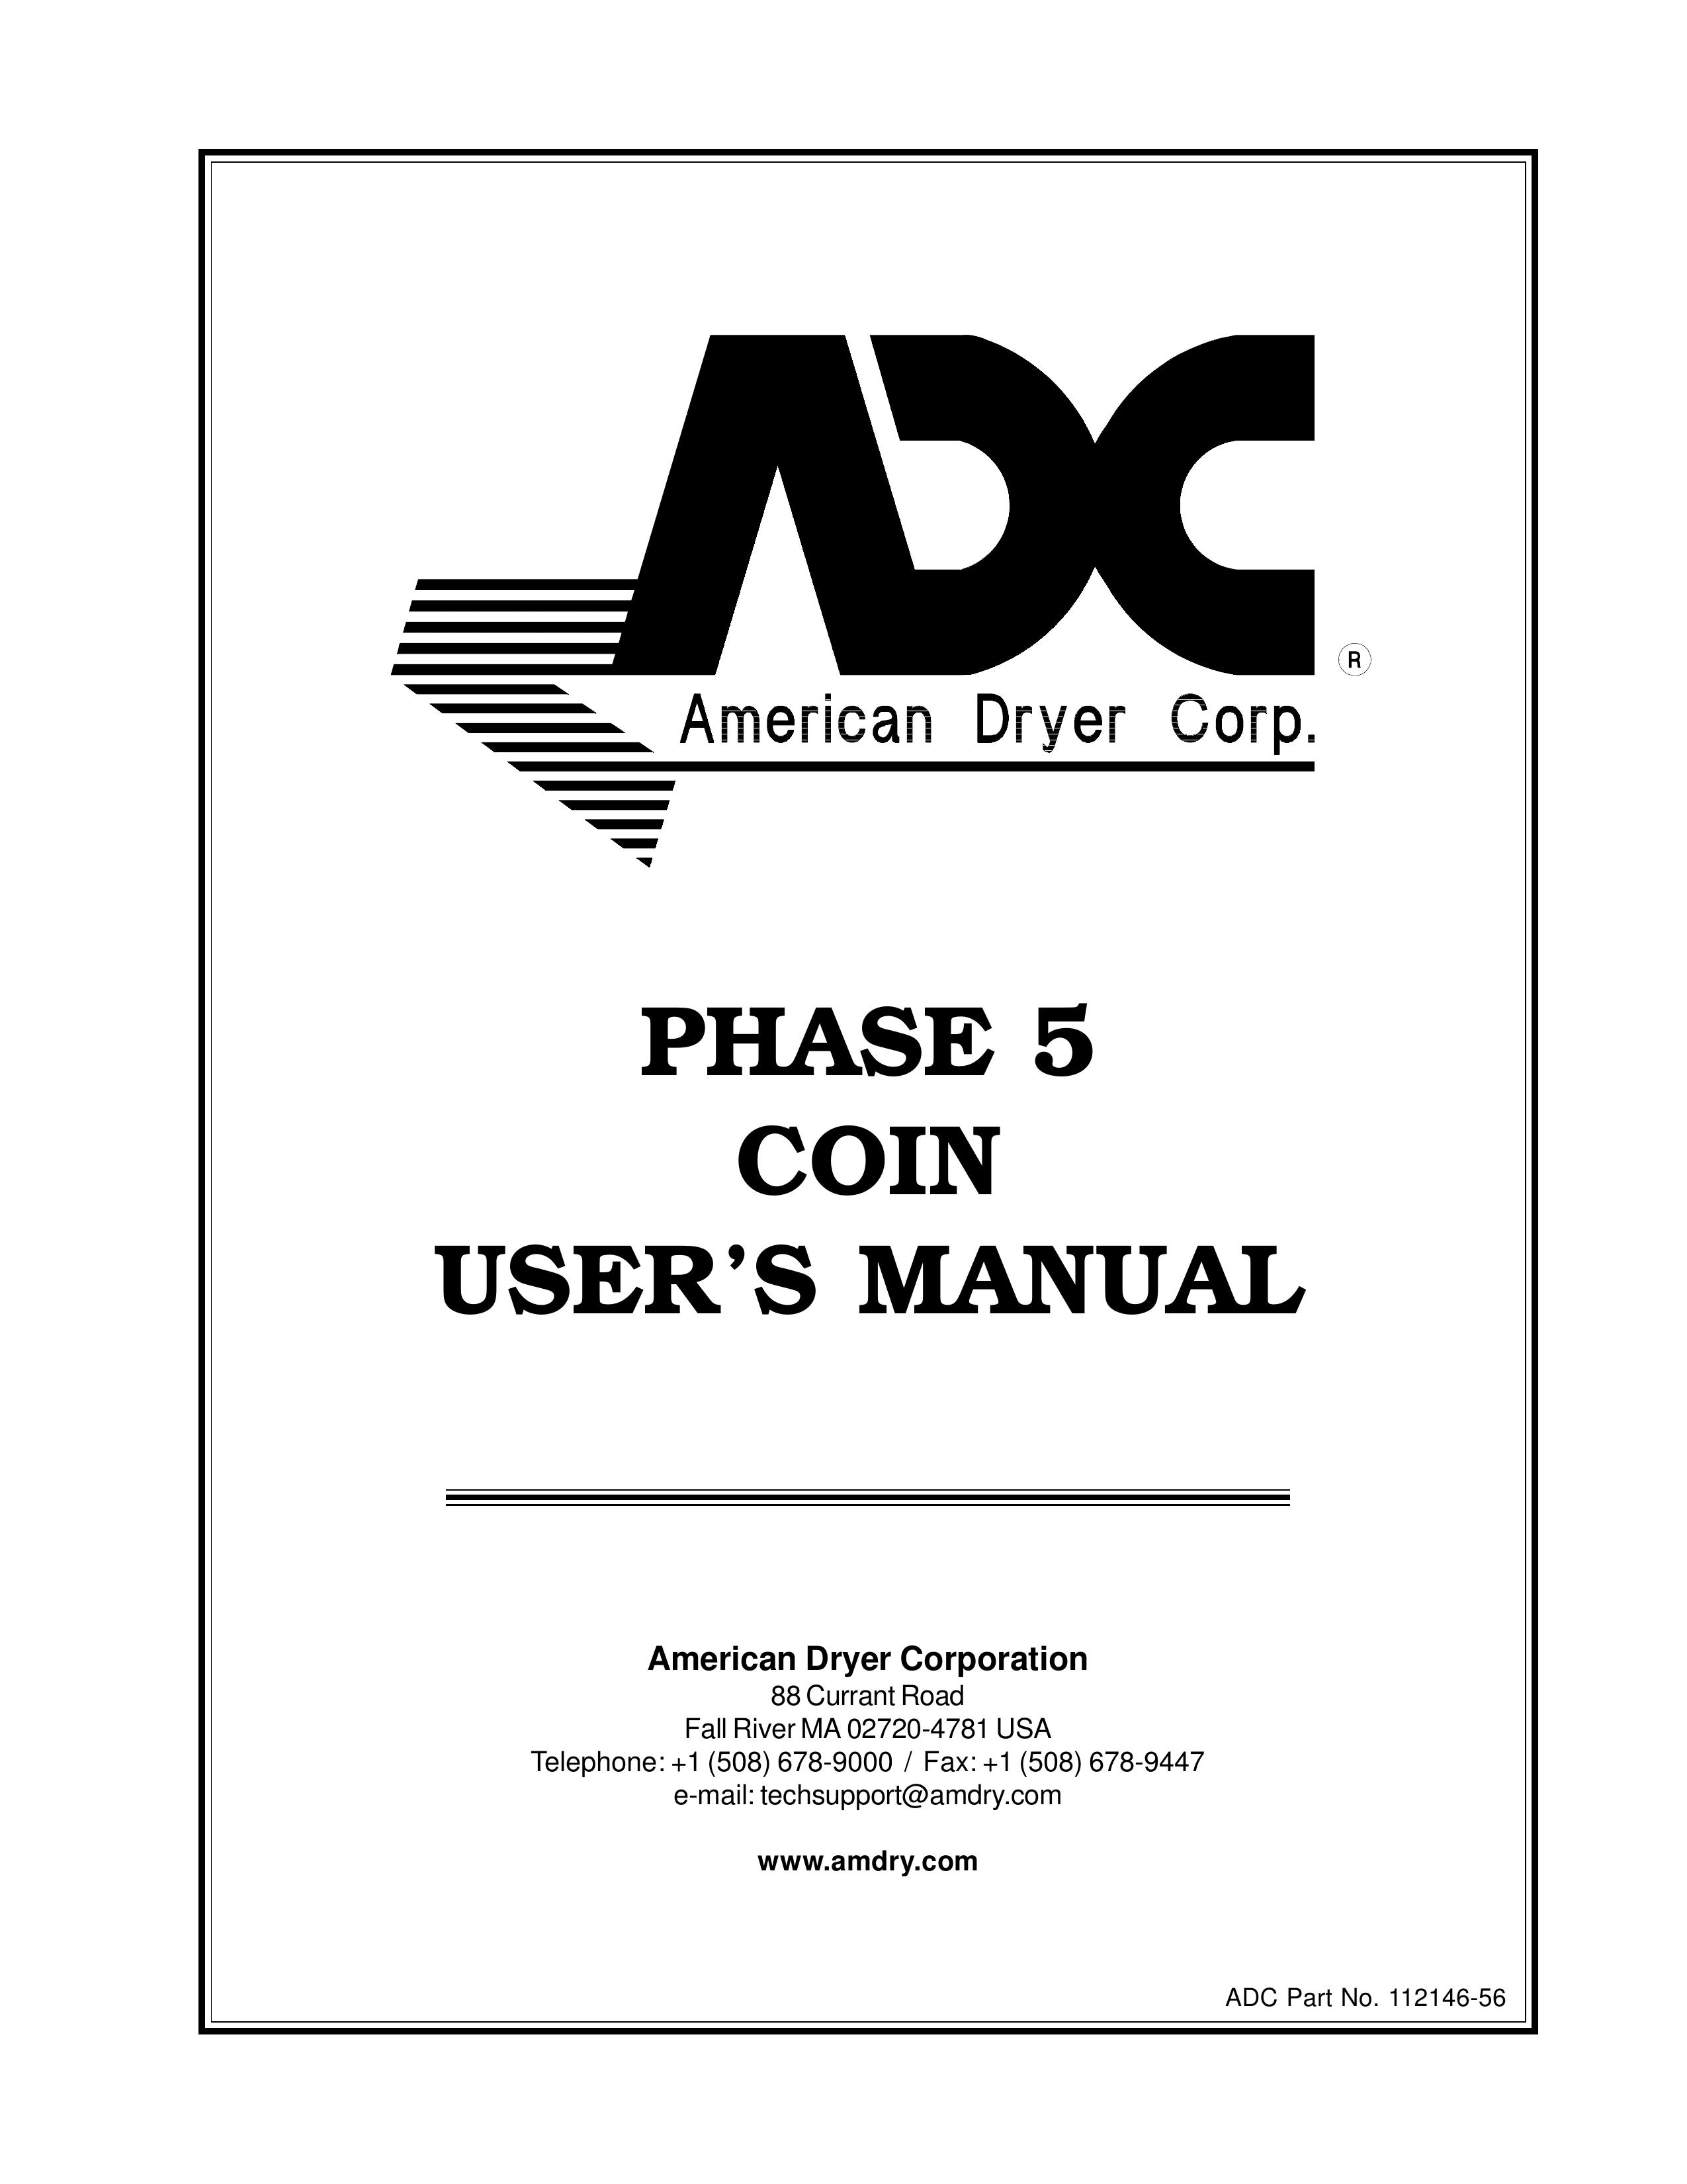 ADC AD-26 Clothes Dryer User Manual